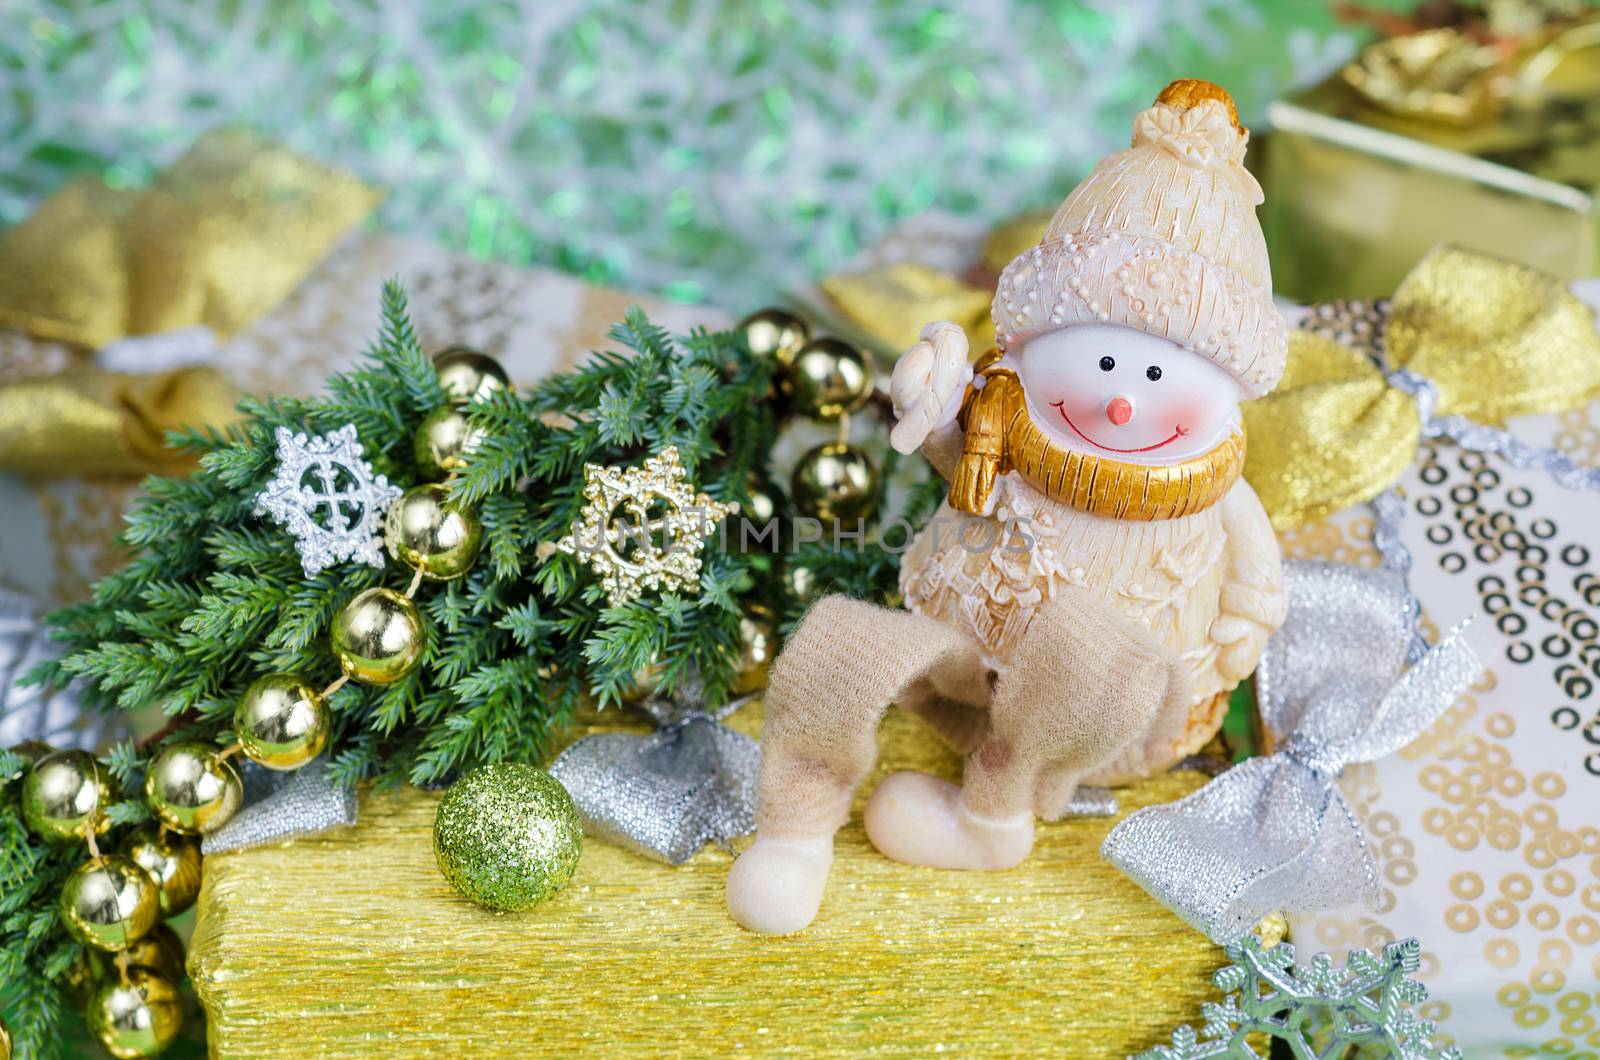 Christmas arrangement in green and gold tones. Cheerful Snowman, gifts   decorations. by Gaina